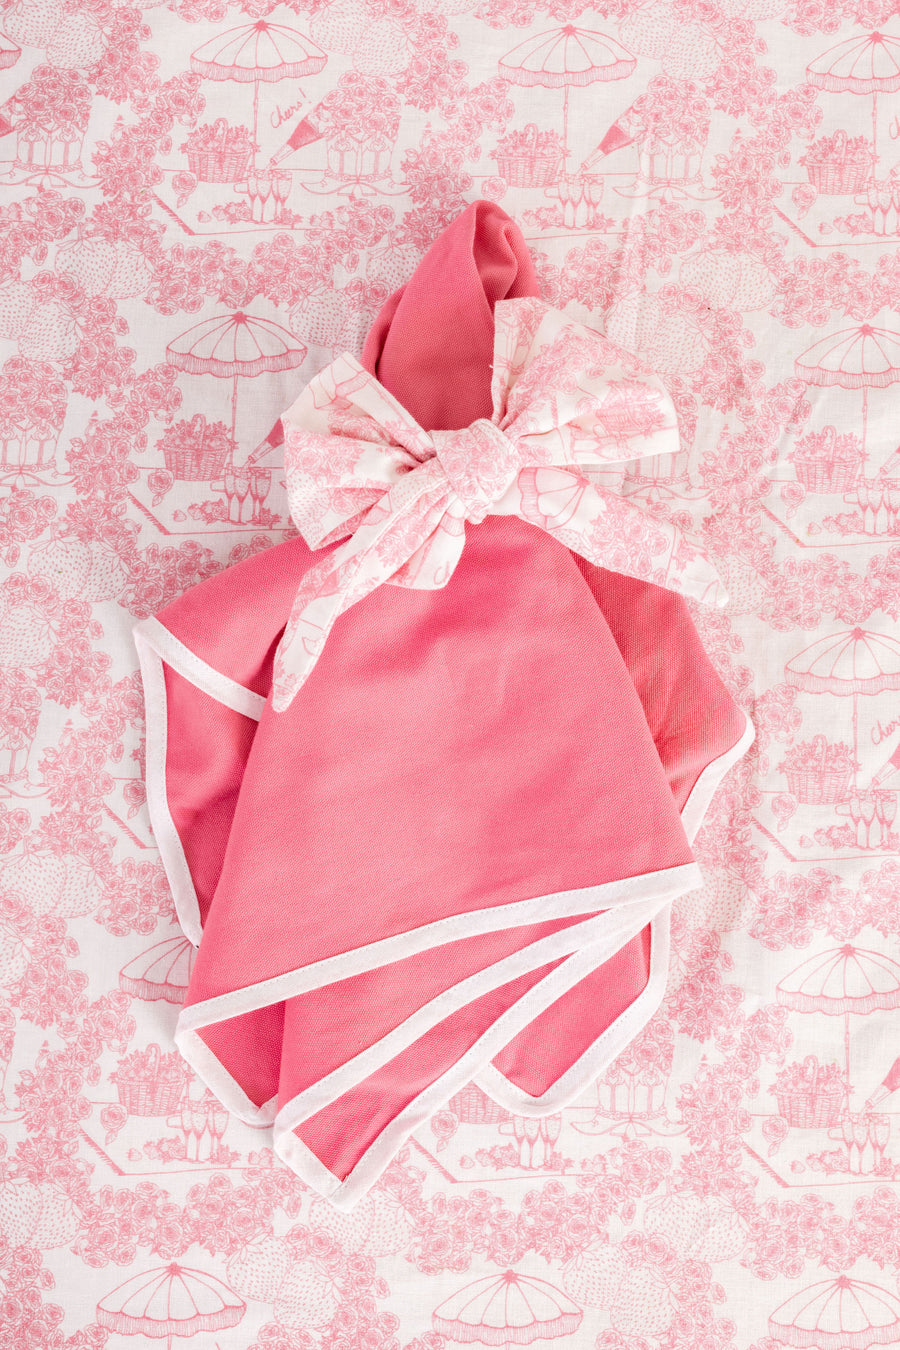 Napkin Ring Set Pink Picnic Toile *Limited*Edition*